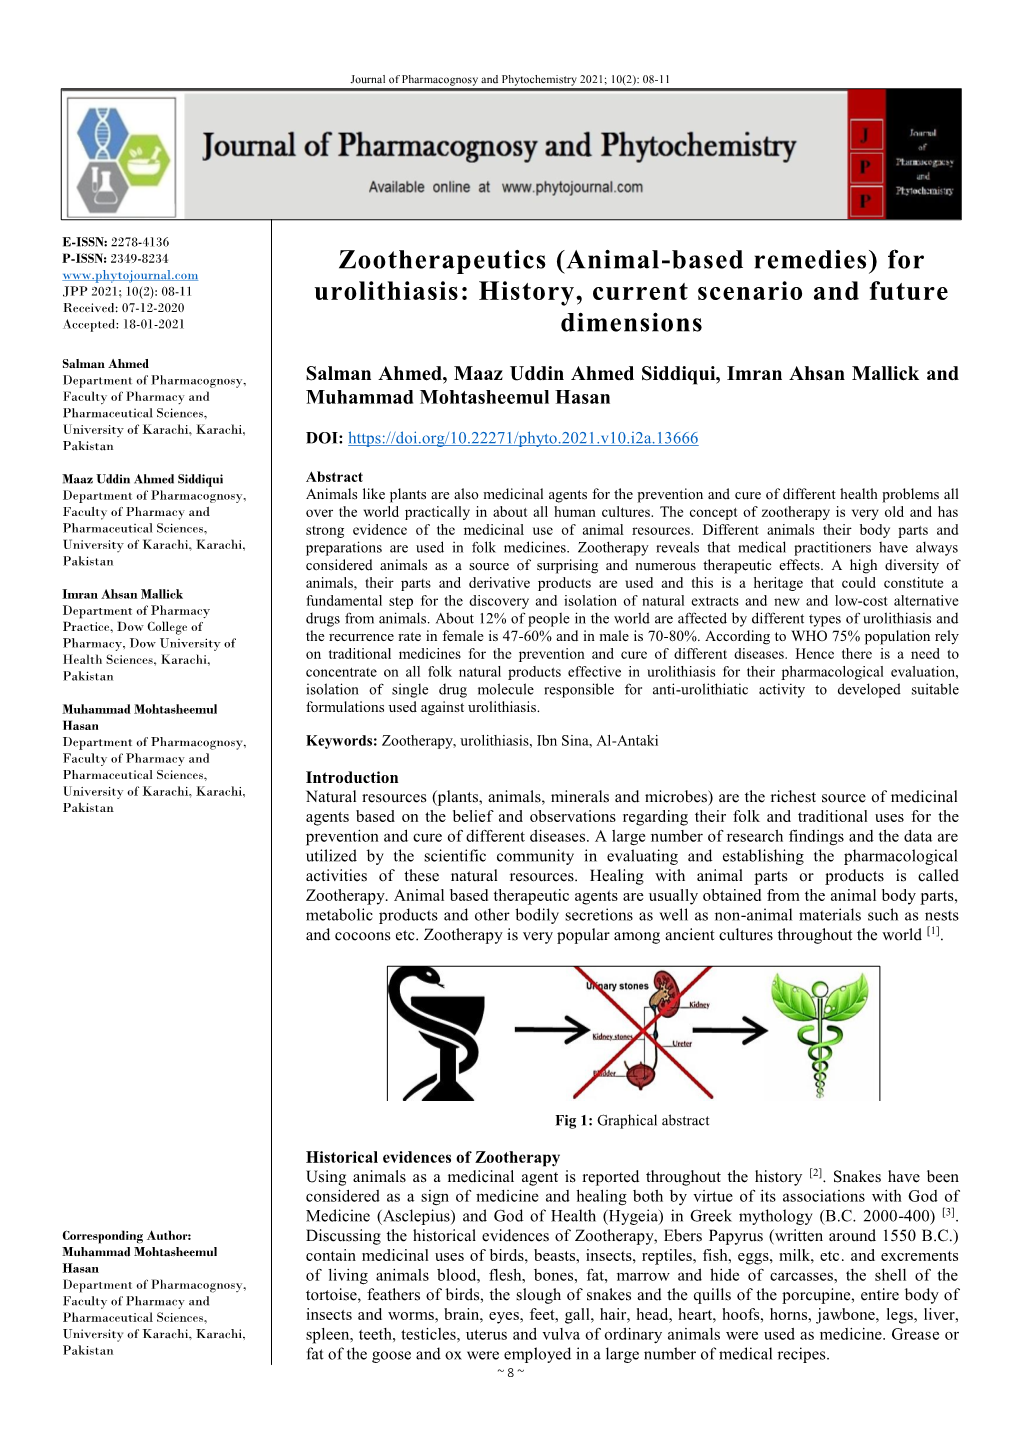 Zootherapeutics (Animal-Based Remedies) for Urolithiasis: History, Current Scenario and Future Dimensions